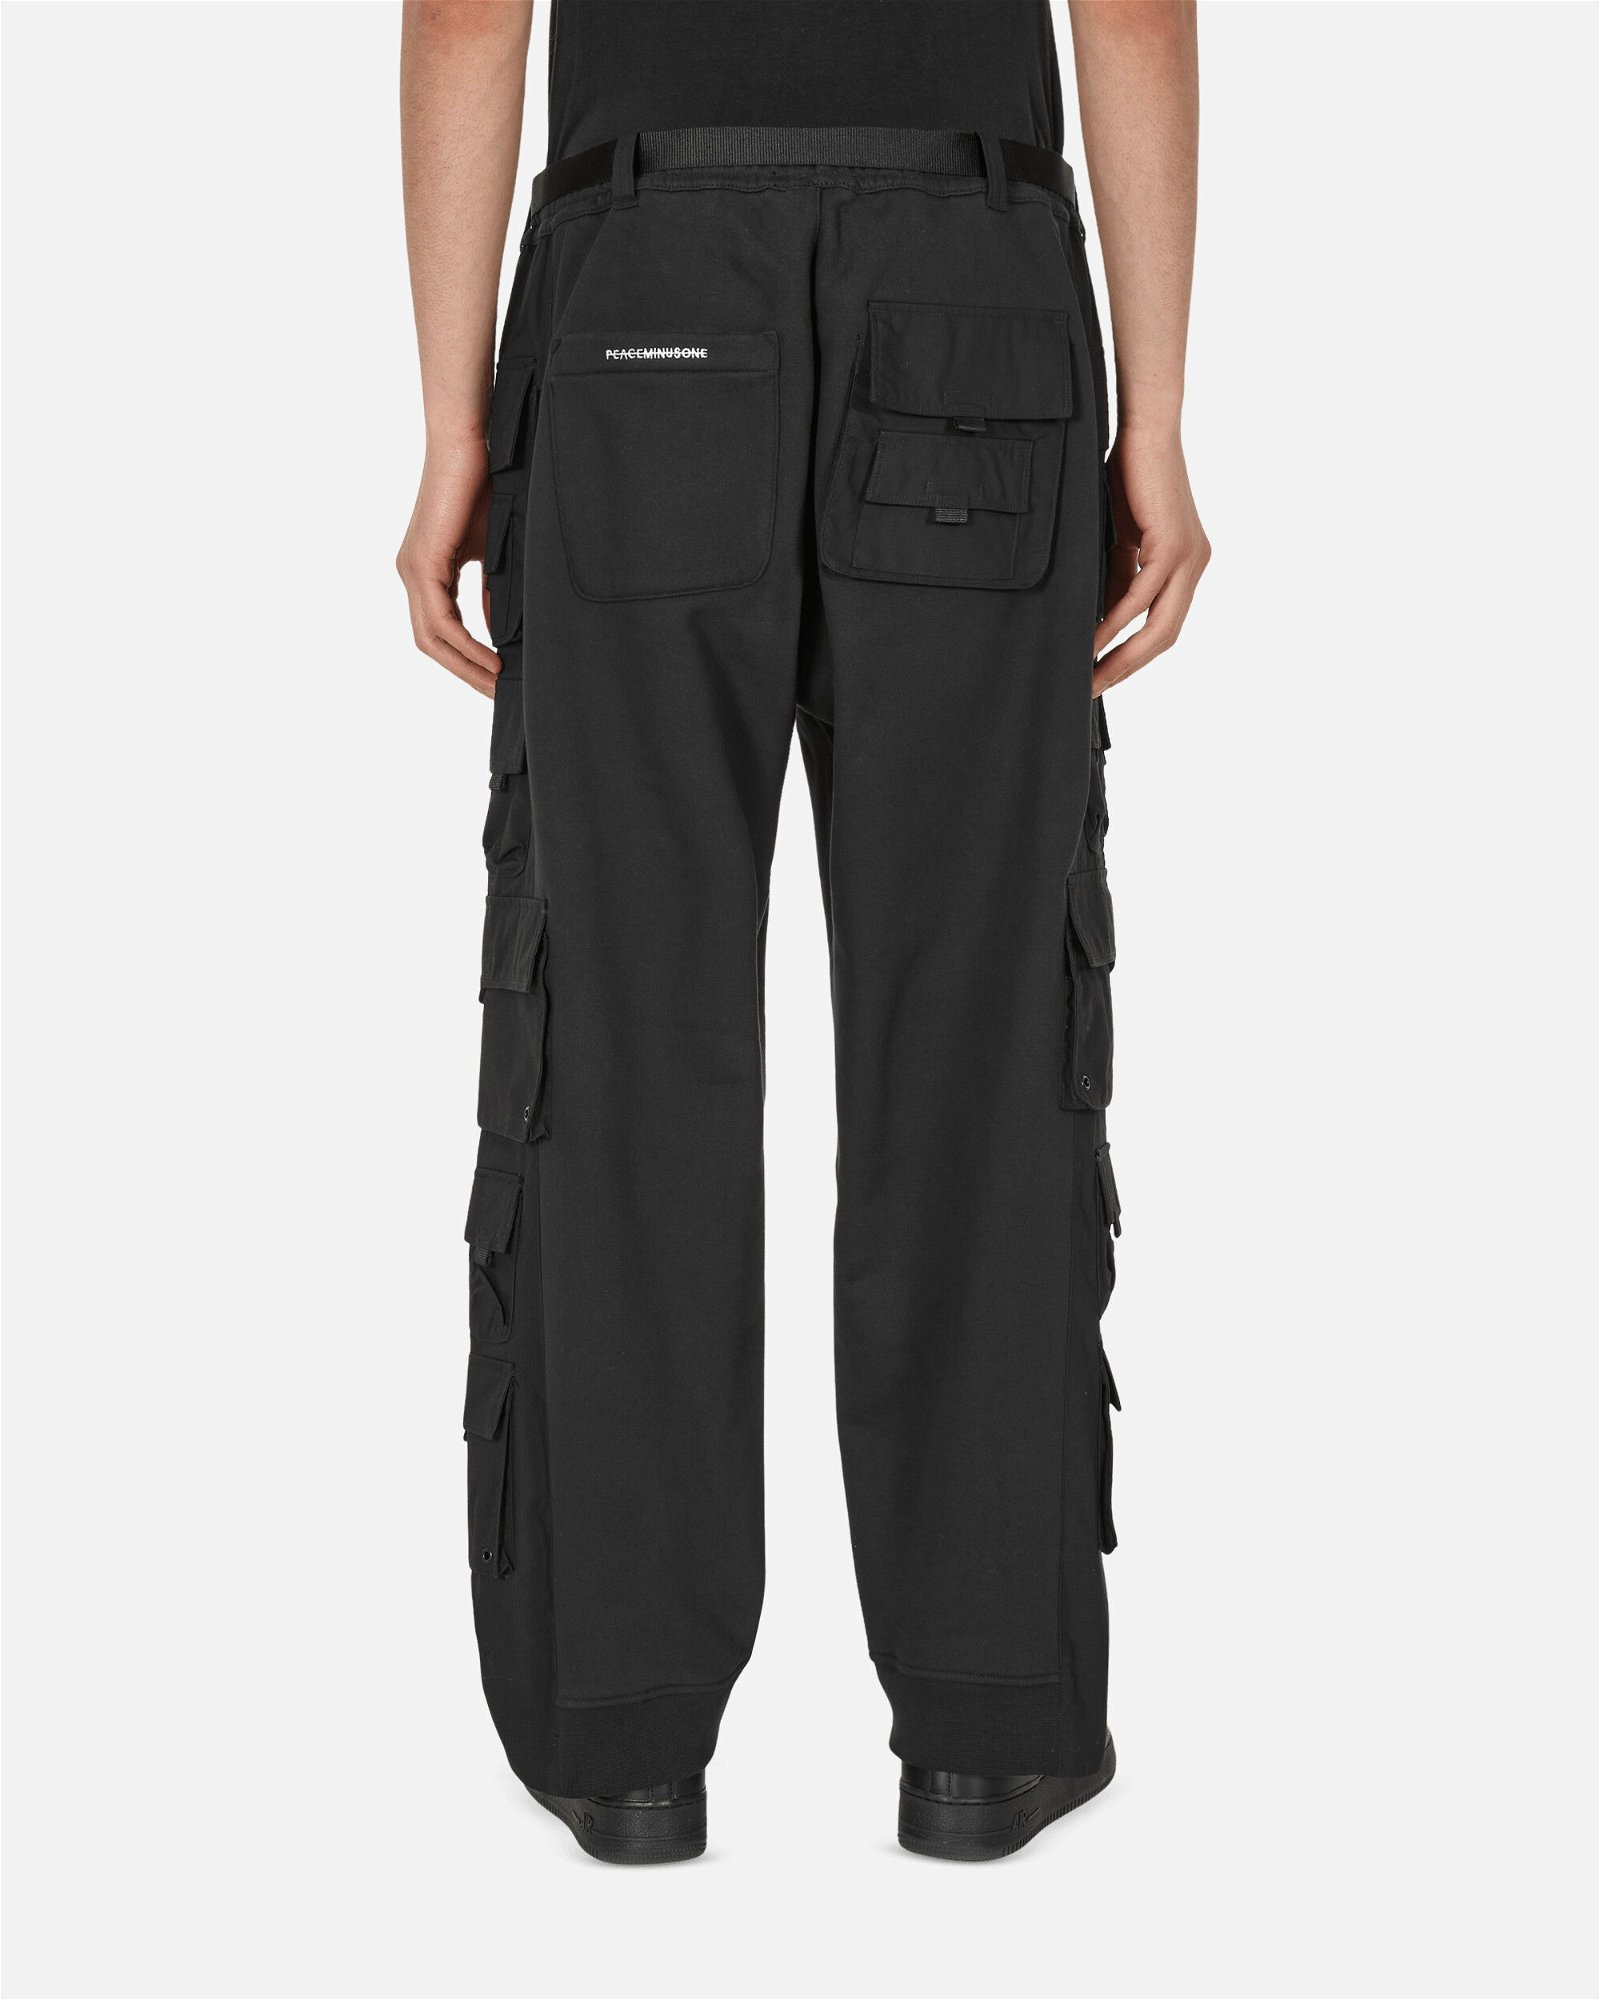 Trousers Nike PEACEMINUSONE G-Dragon Wide Trousers DR0095-010